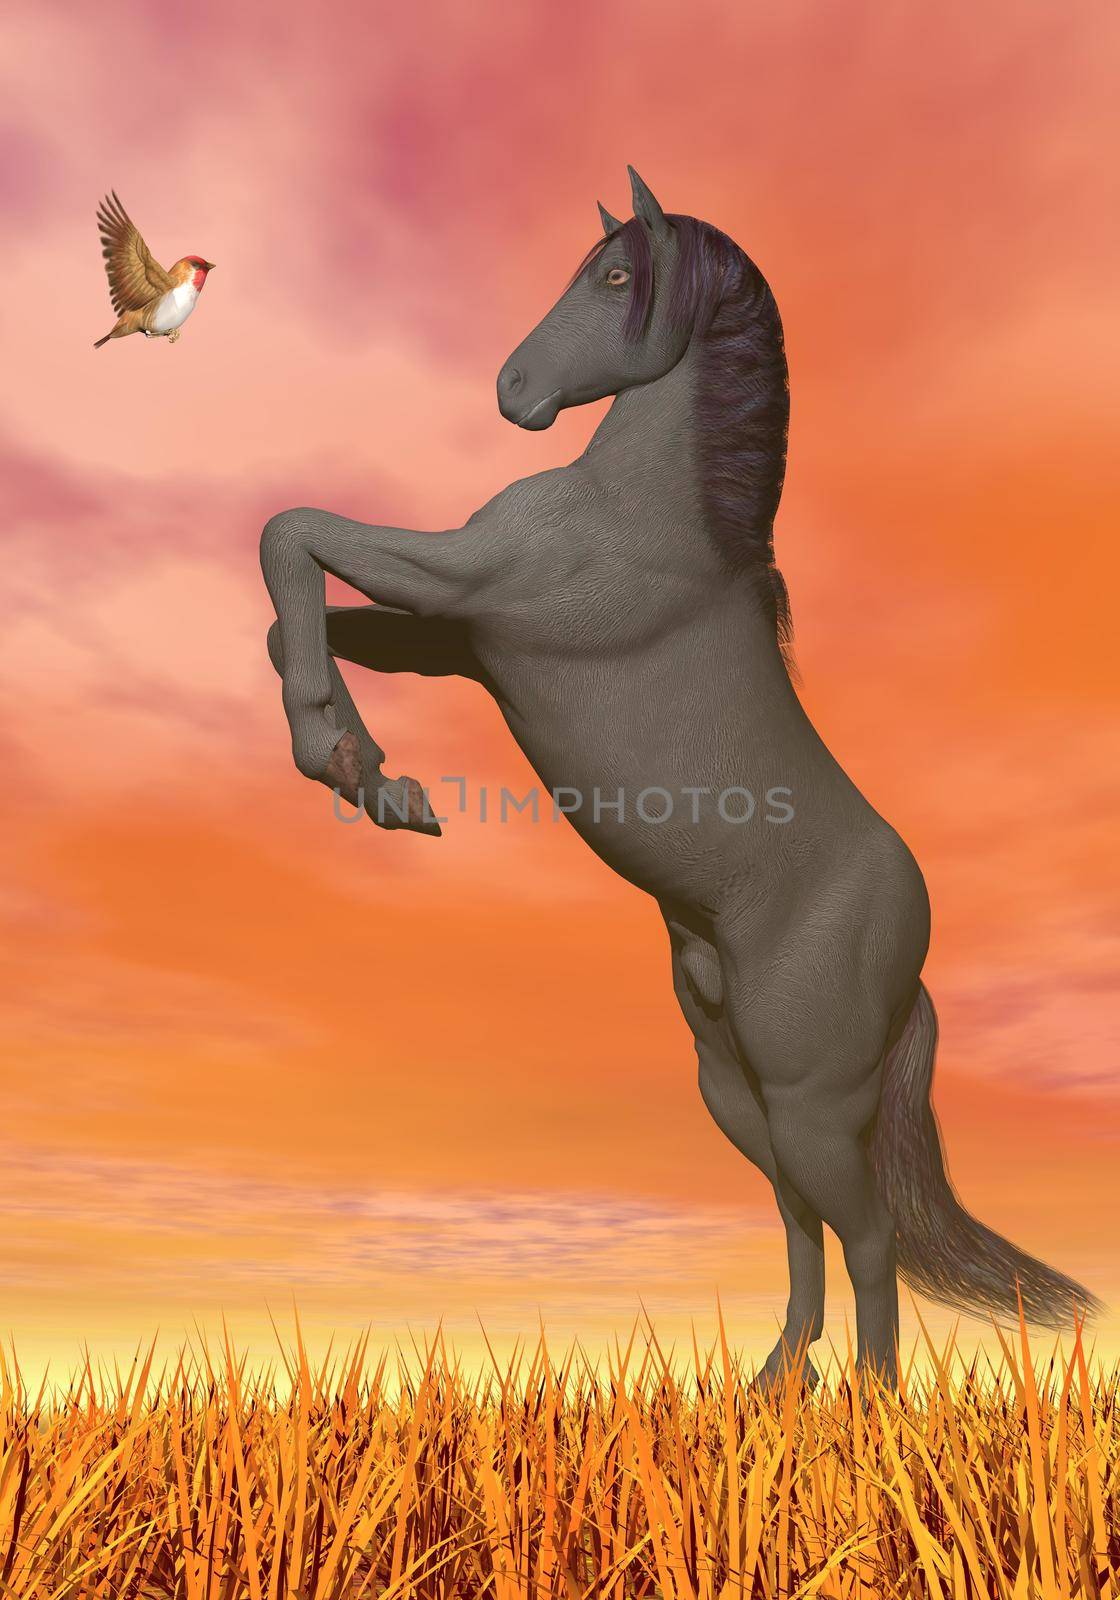 Rearing horse in front of little monarch butterfly by beautiful orange sunset sky